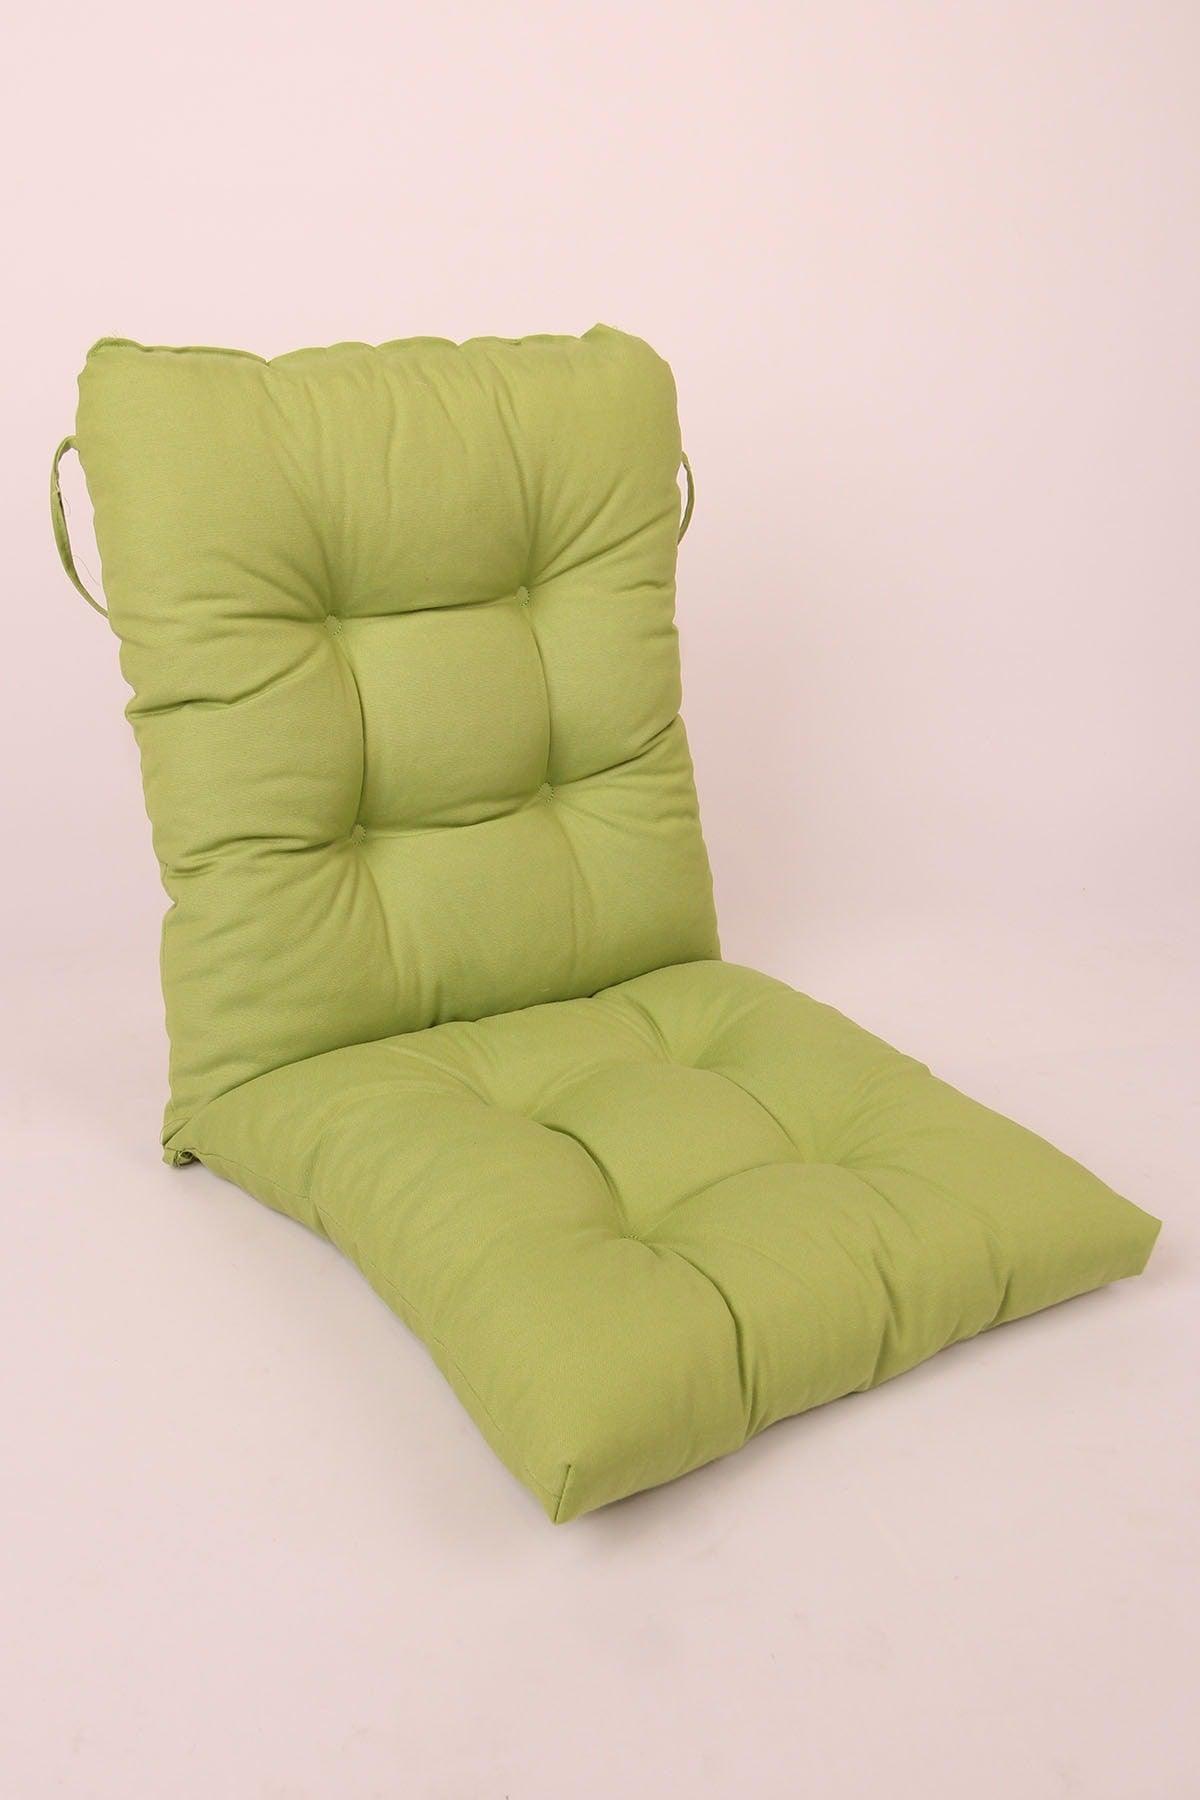 Neva Pofidik Green Backed Chair Cushion Specially Stitched Laced 44x94 Cm - Swordslife